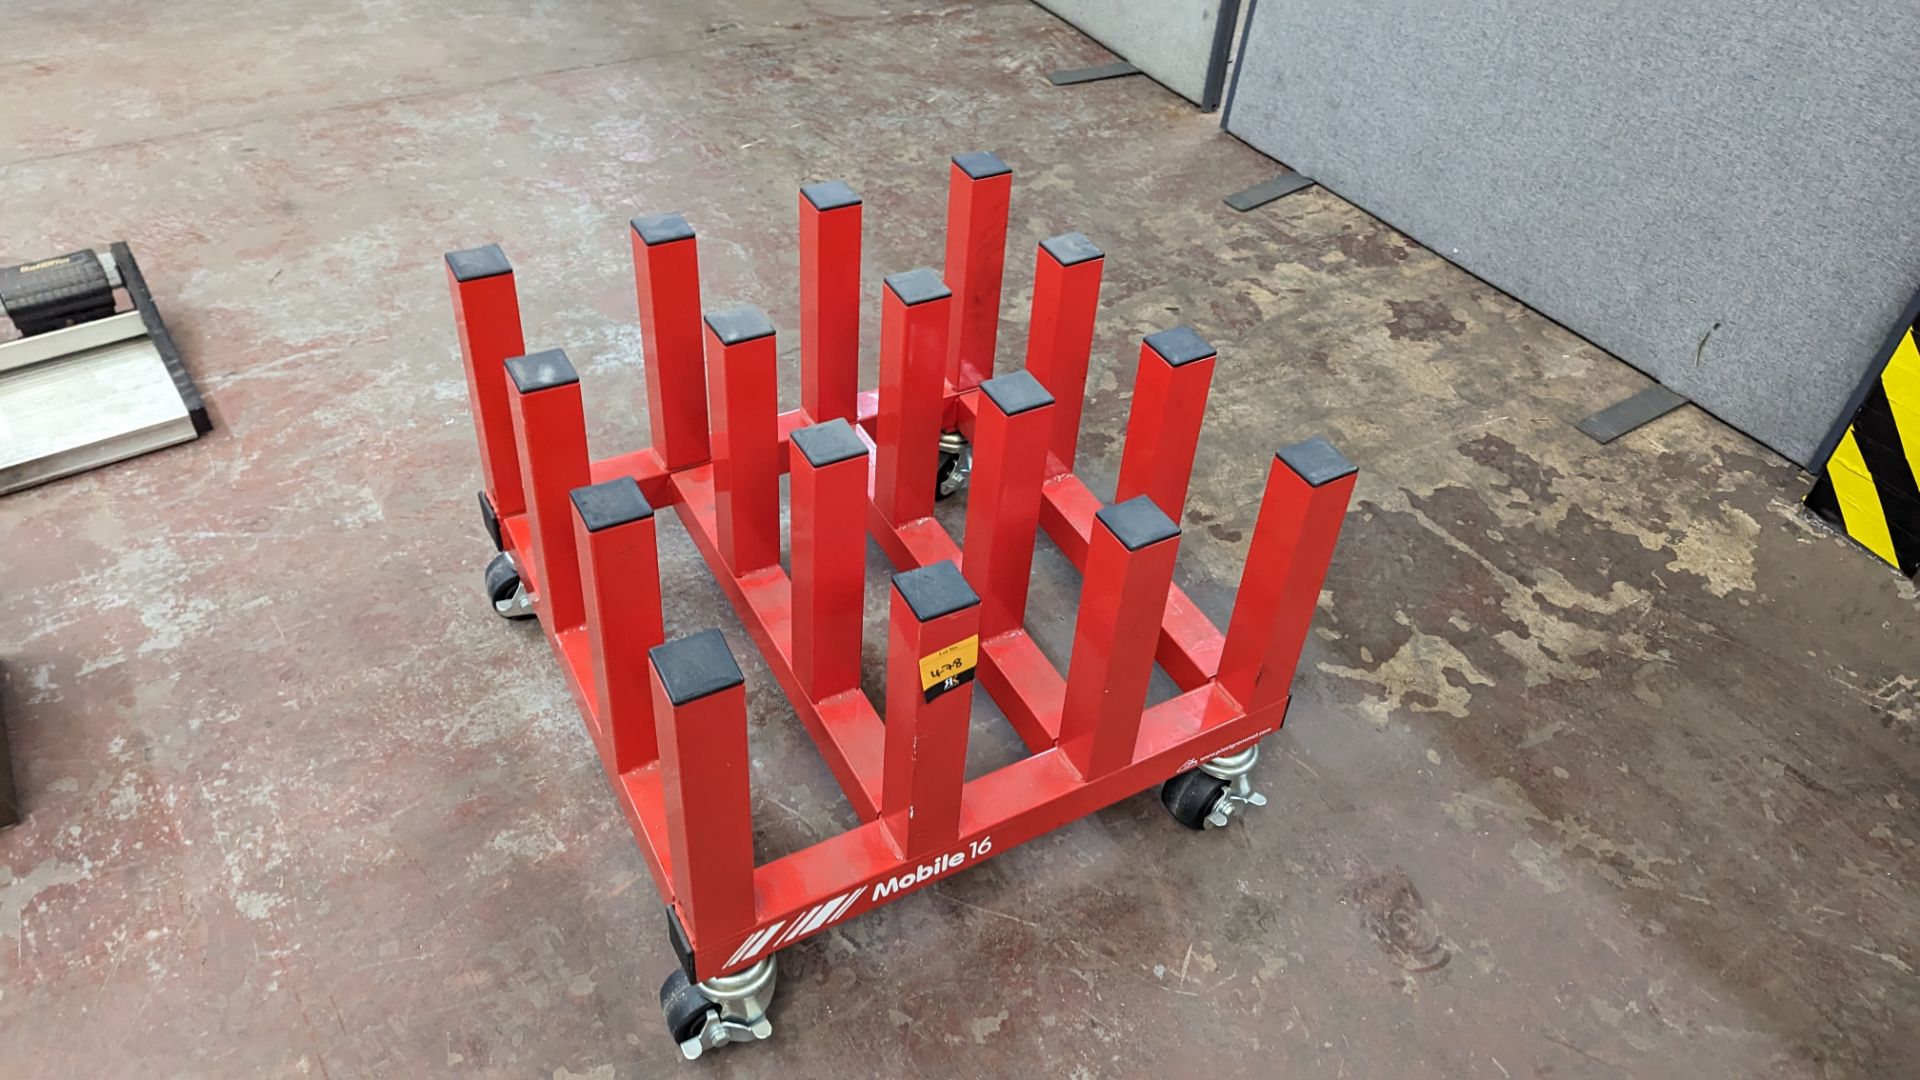 Mobile 16 red materials handling trolley with 16 "stumps"